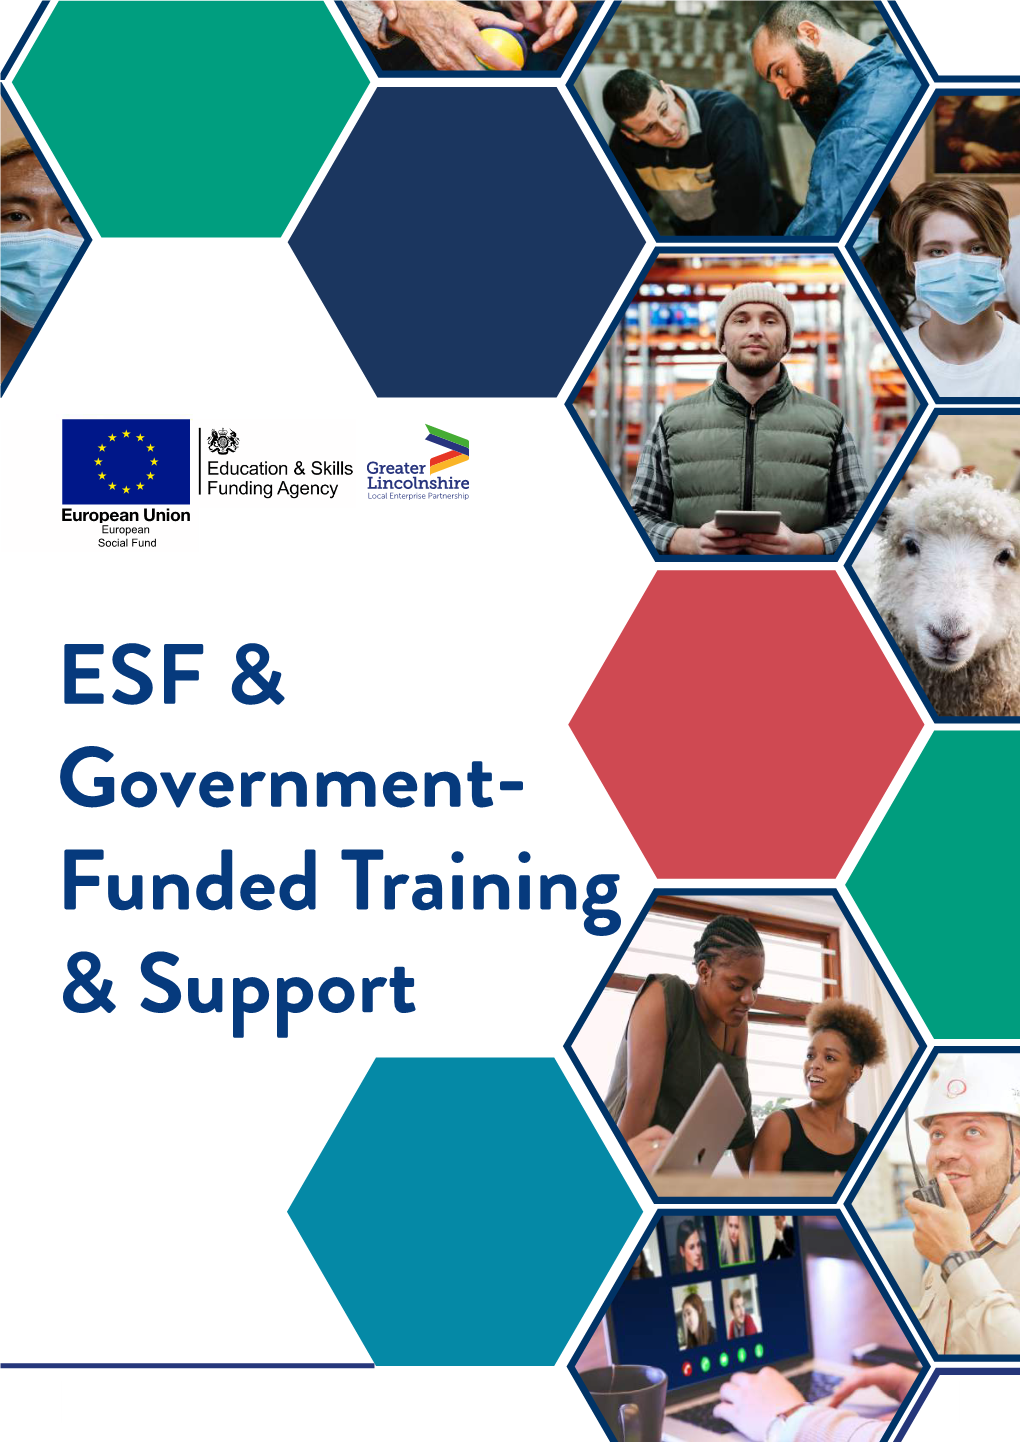 ESF & Government- Funded Training & Support